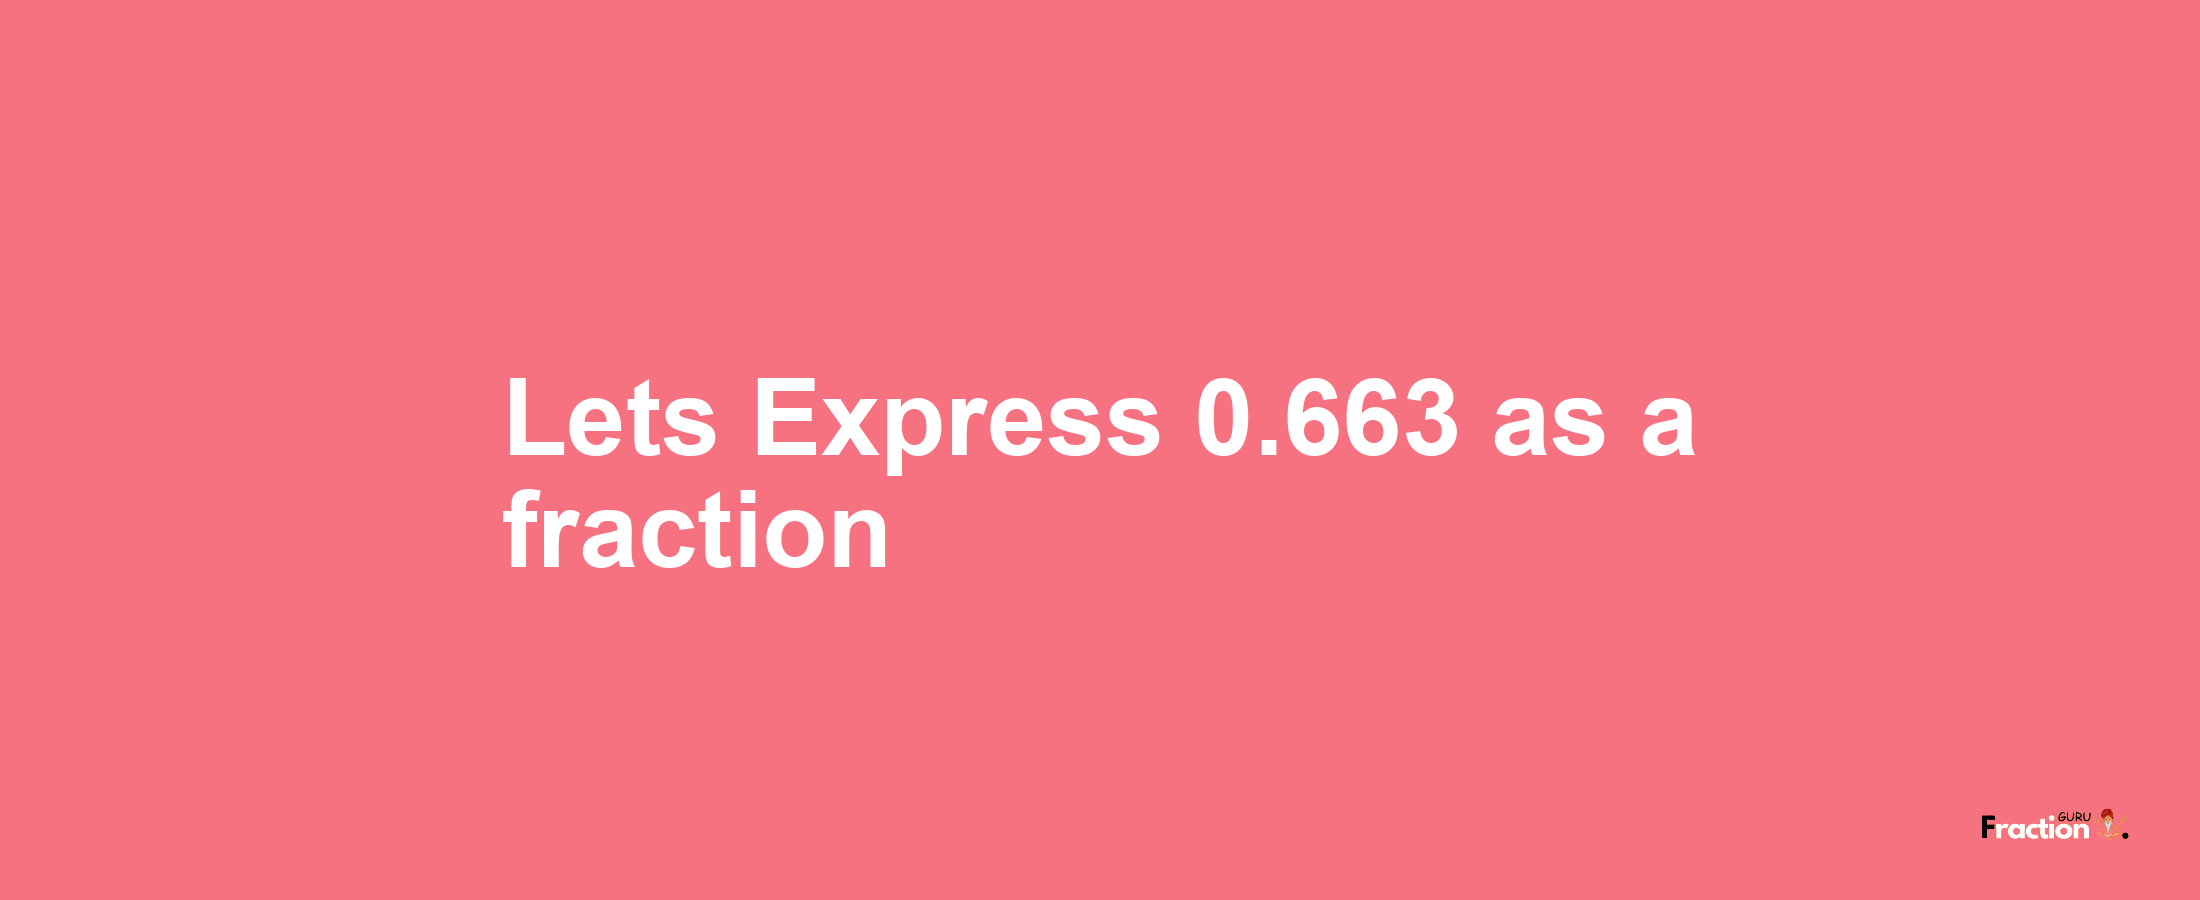 Lets Express 0.663 as afraction